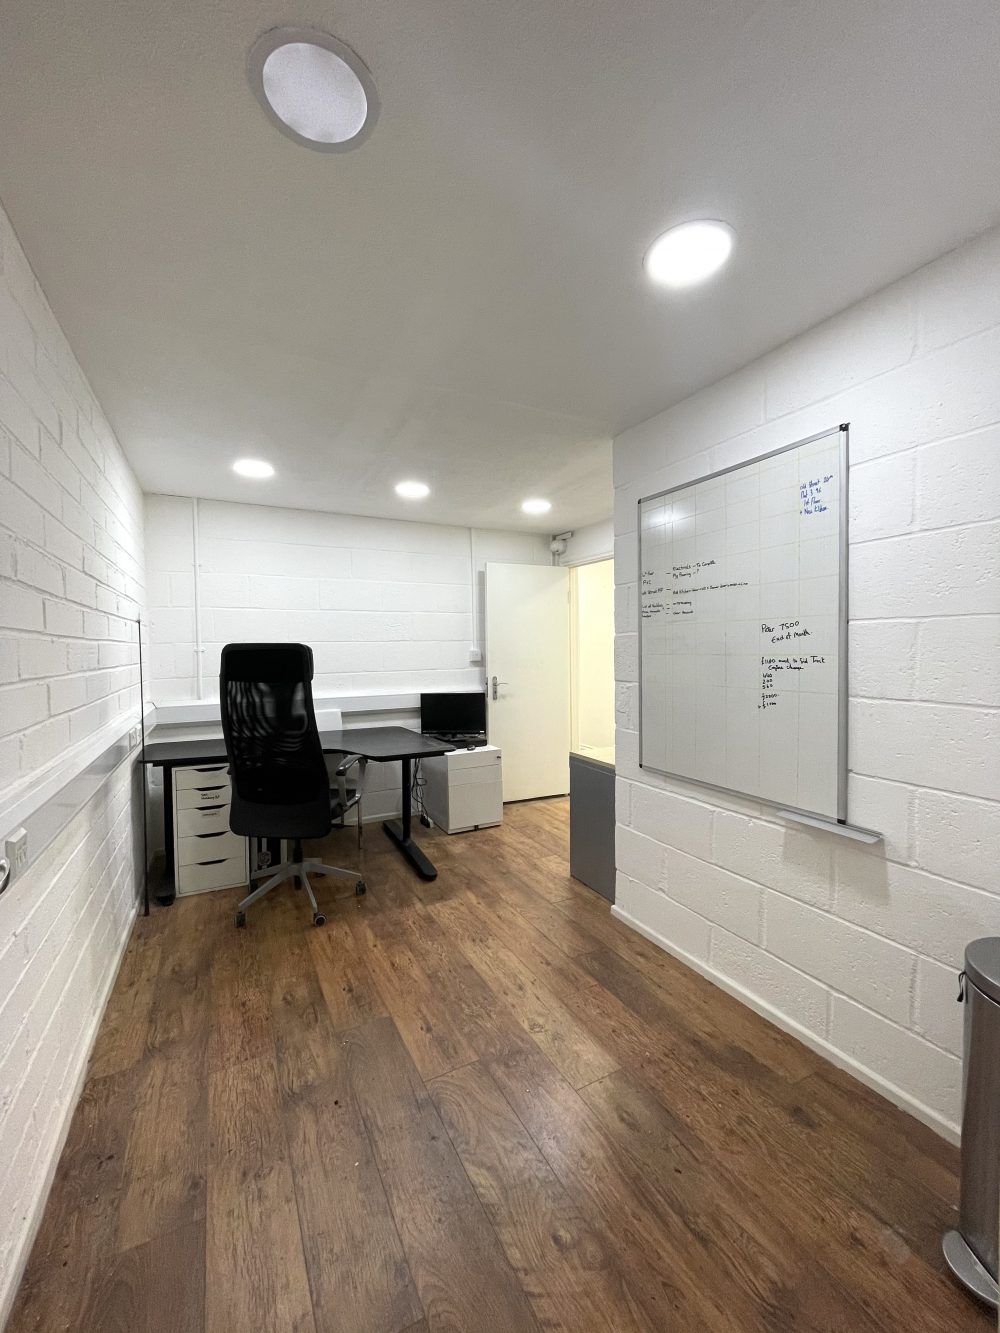 N15 Seven Sisters (High Cross, Fountayne Road) – Live work style Warehouse Unit to rent for artists 8